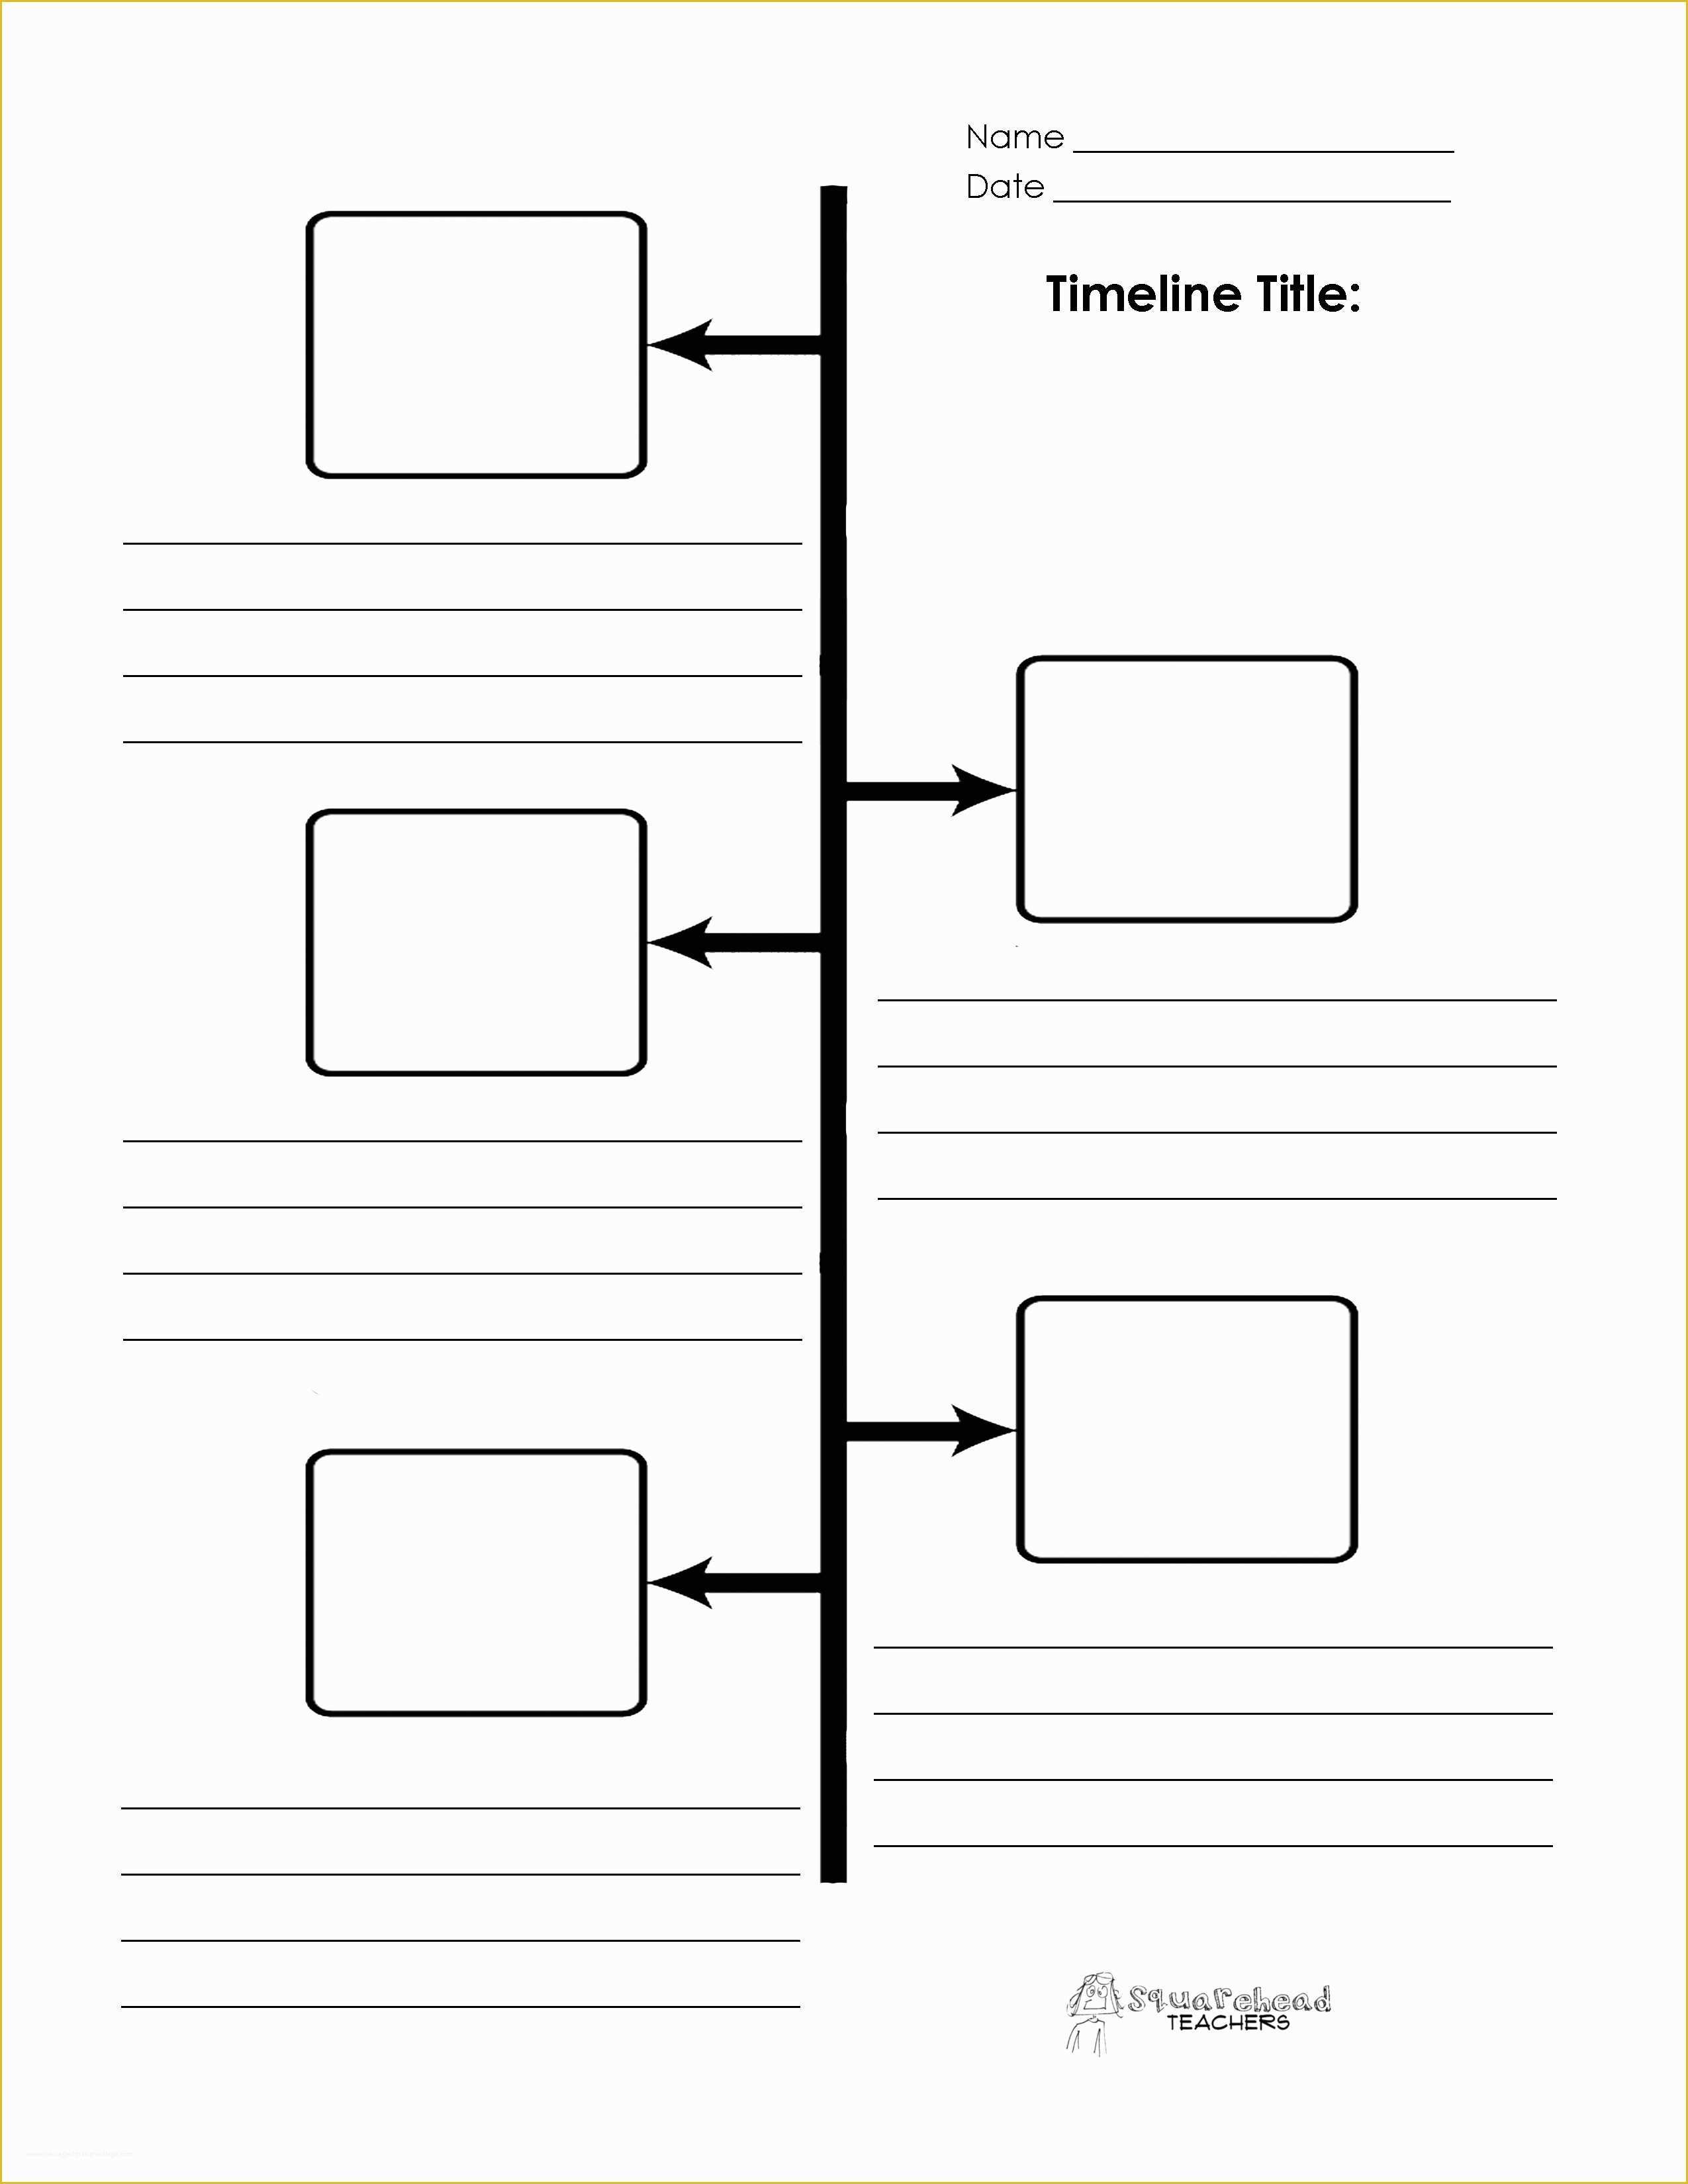 timeline word template